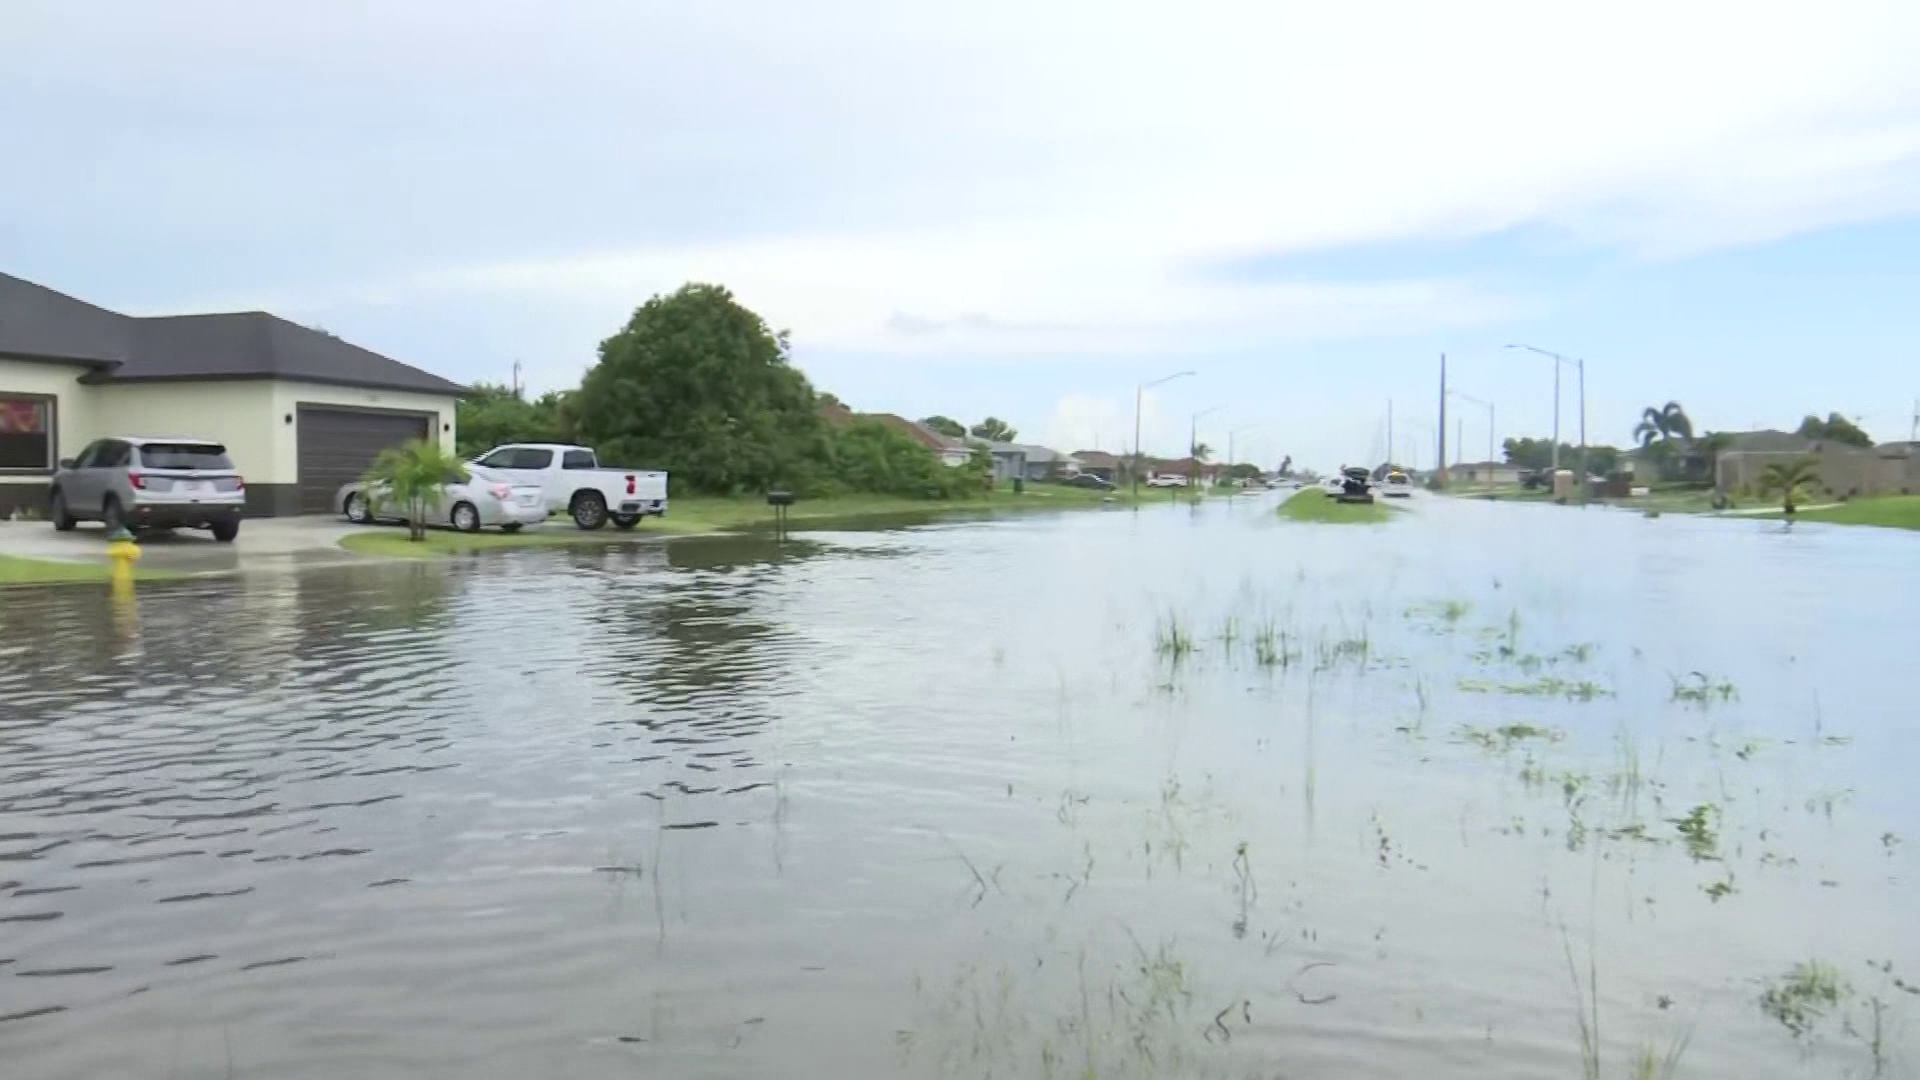 SWFL flood insurance going up for new policyholders starting Friday